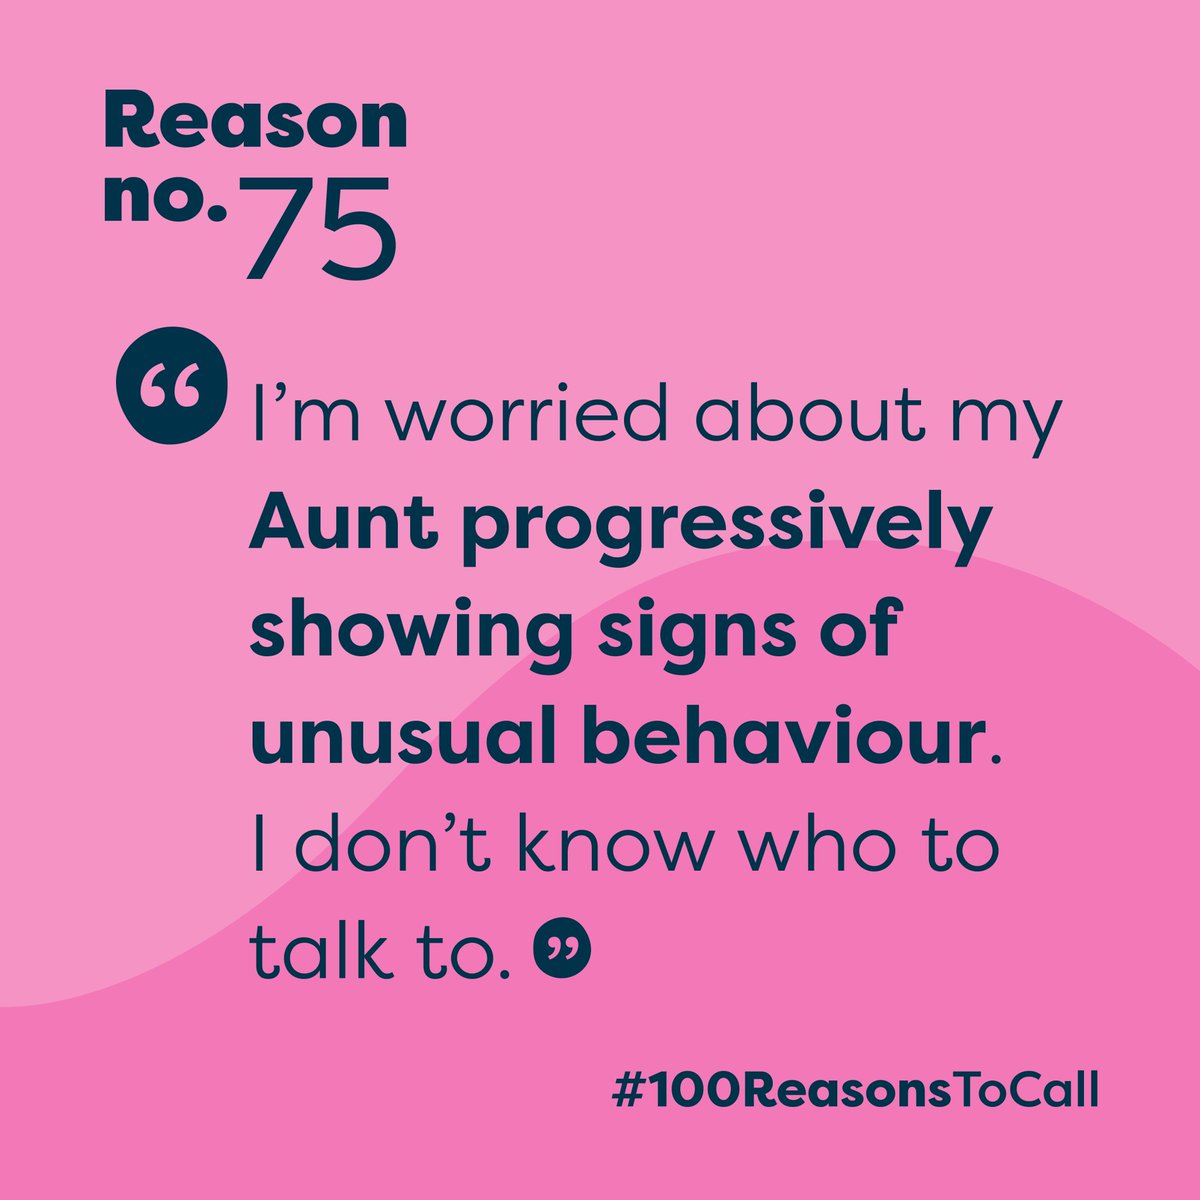 There are several conditions that result in symptoms similar to dementia which is why we encourage anyone who is experiencing symptoms to speak with their doctor. For advice or support call the National Dementia Helpline anytime on 1800 100 500. #100ReasonsToCall